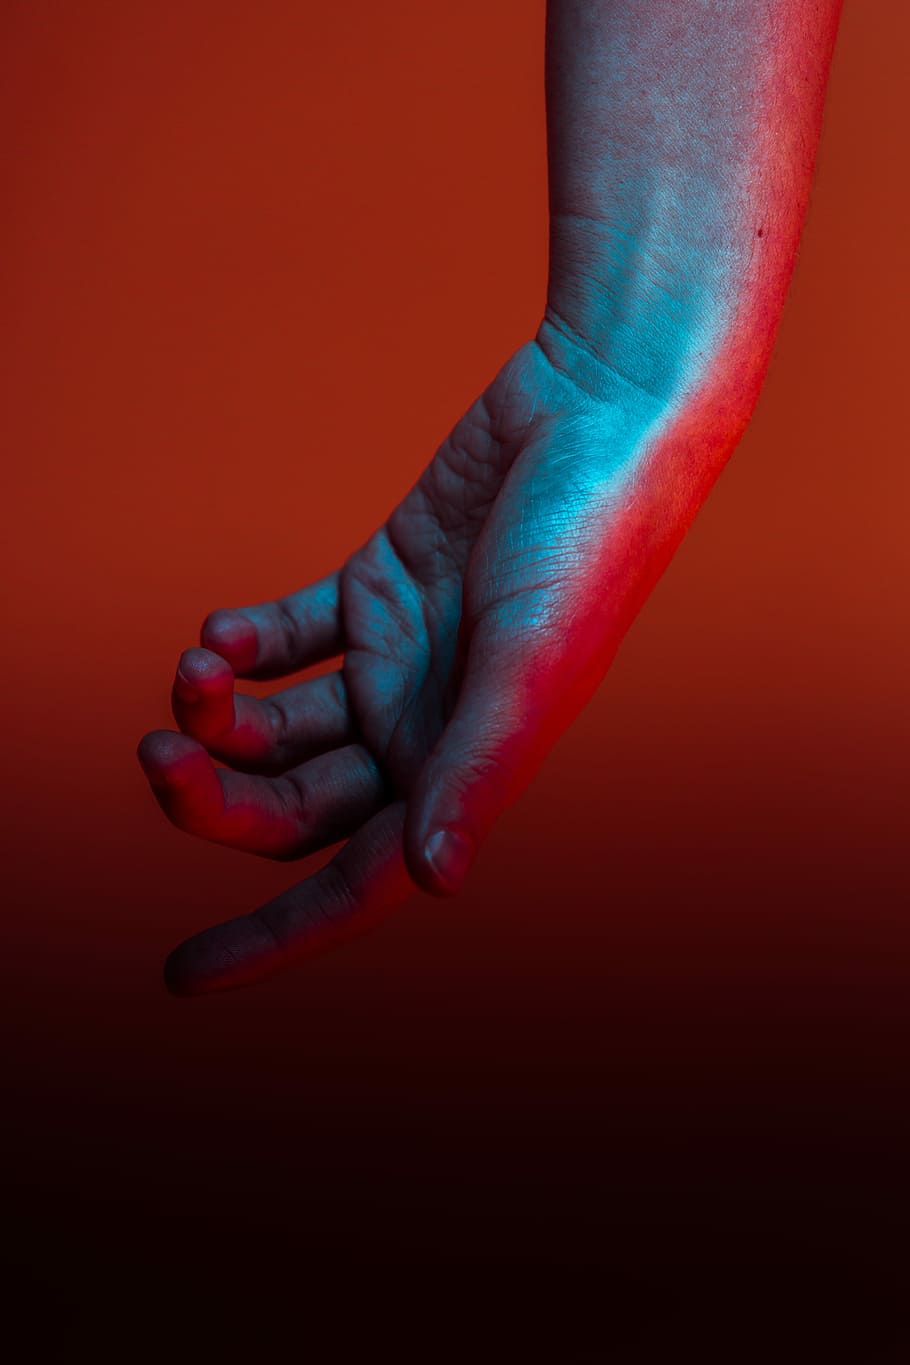 HD wallpaper: person's left hand, left human hand, blue, red, caucasian,  moody | Wallpaper Flare